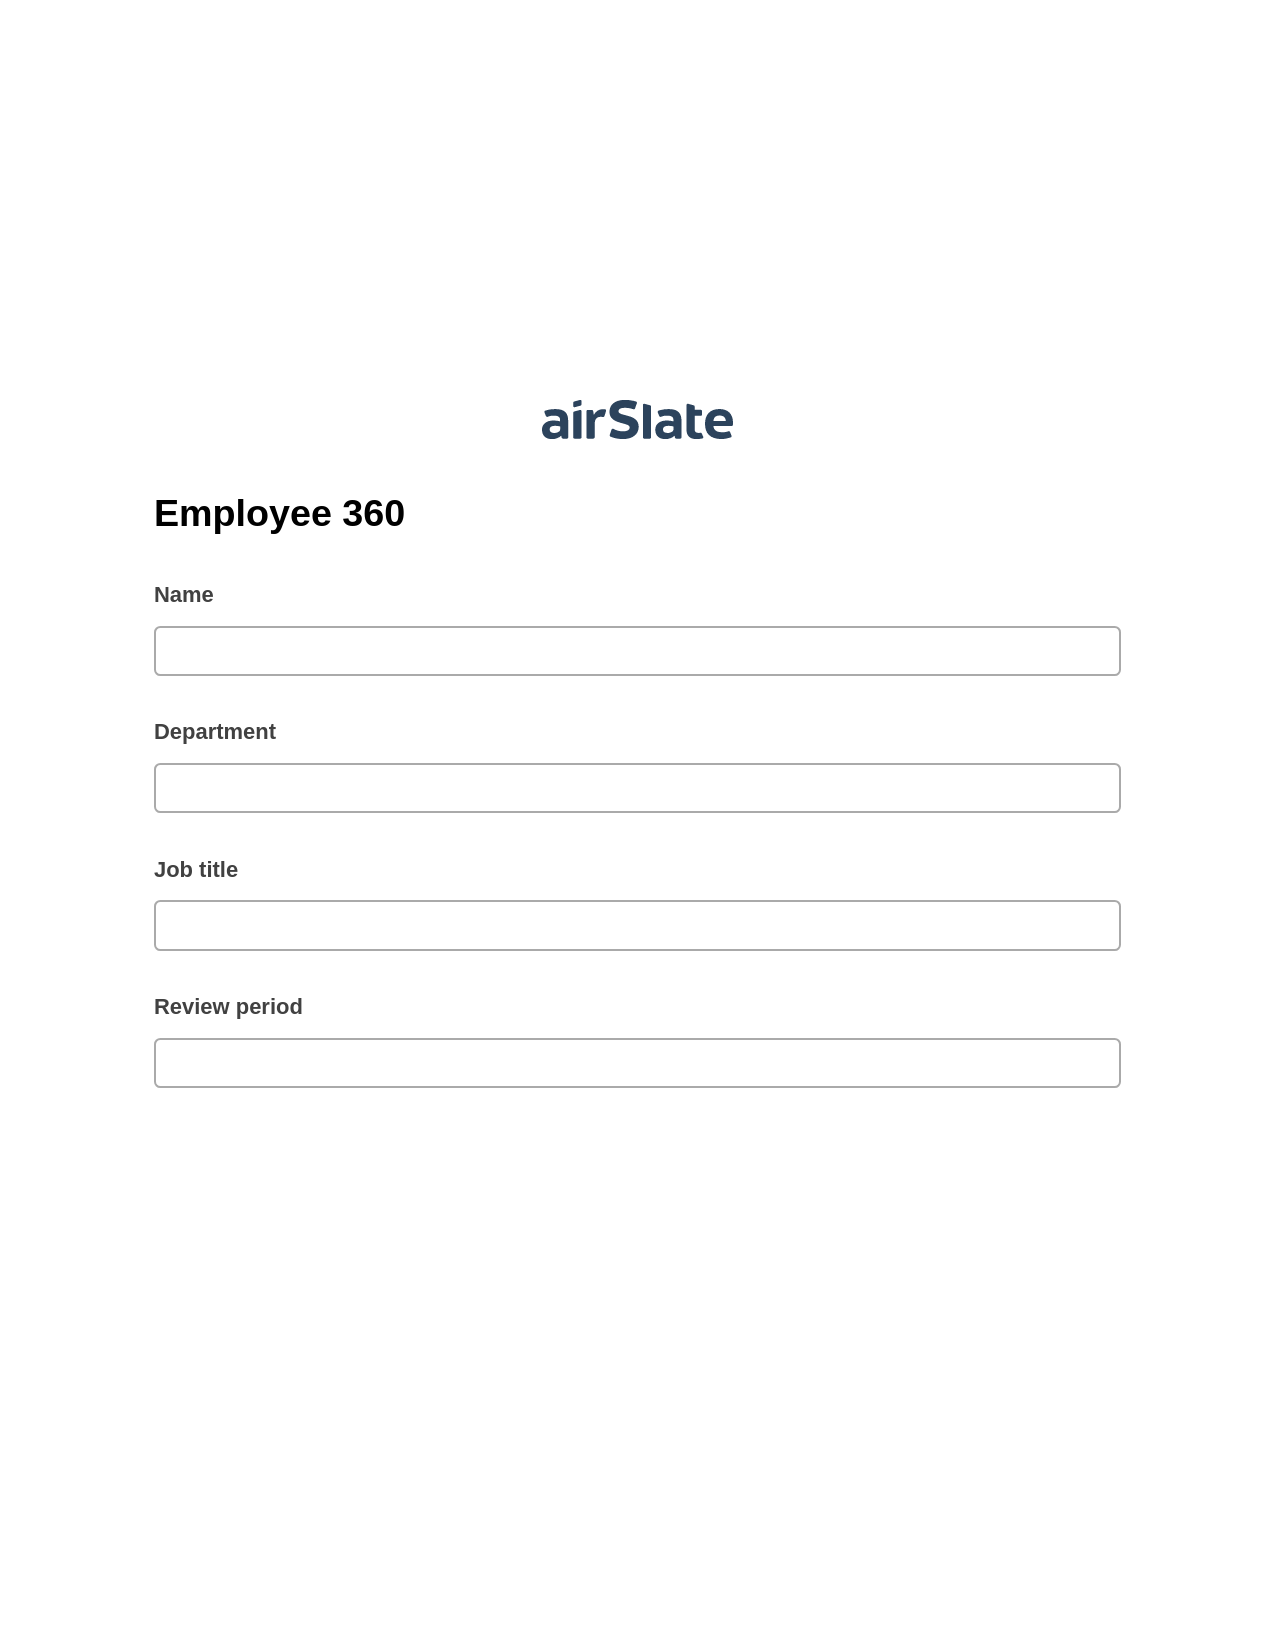 Multirole Employee 360 Pre-fill from Salesforce Records with SOQL Bot, Slack Notification Bot, Archive to Box Bot